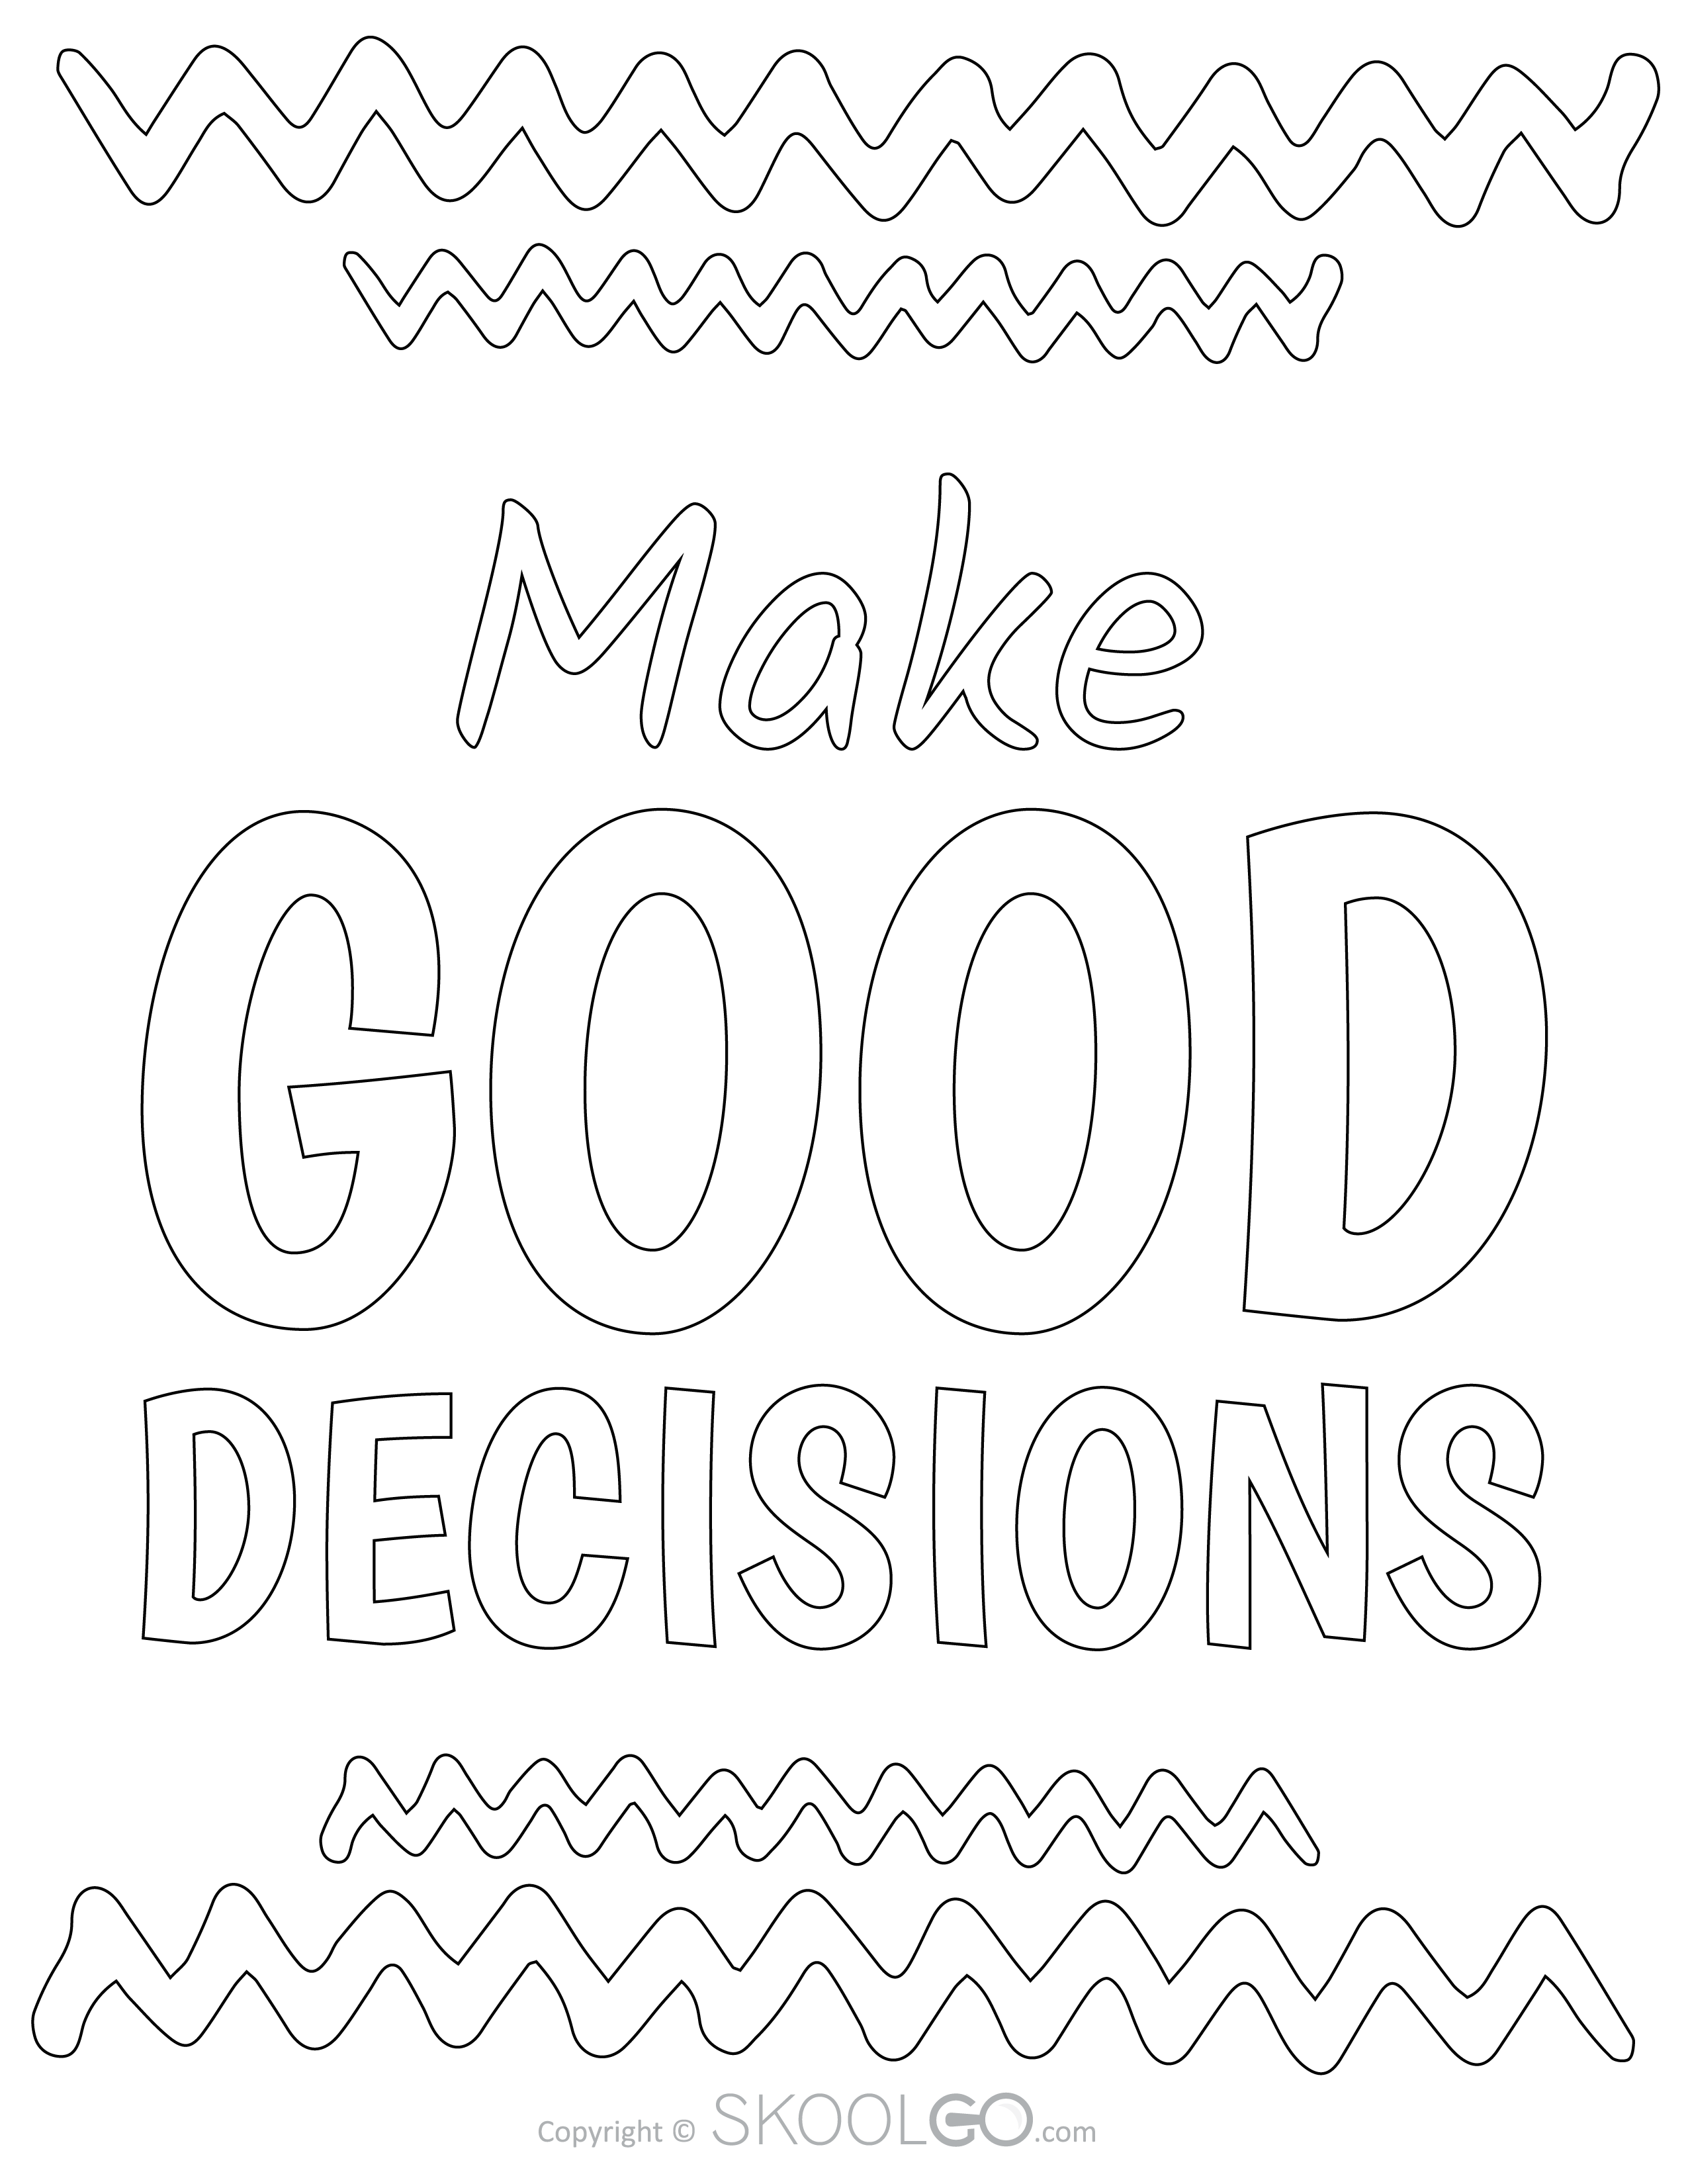 Make Good Decisions - Free Coloring Version Poster